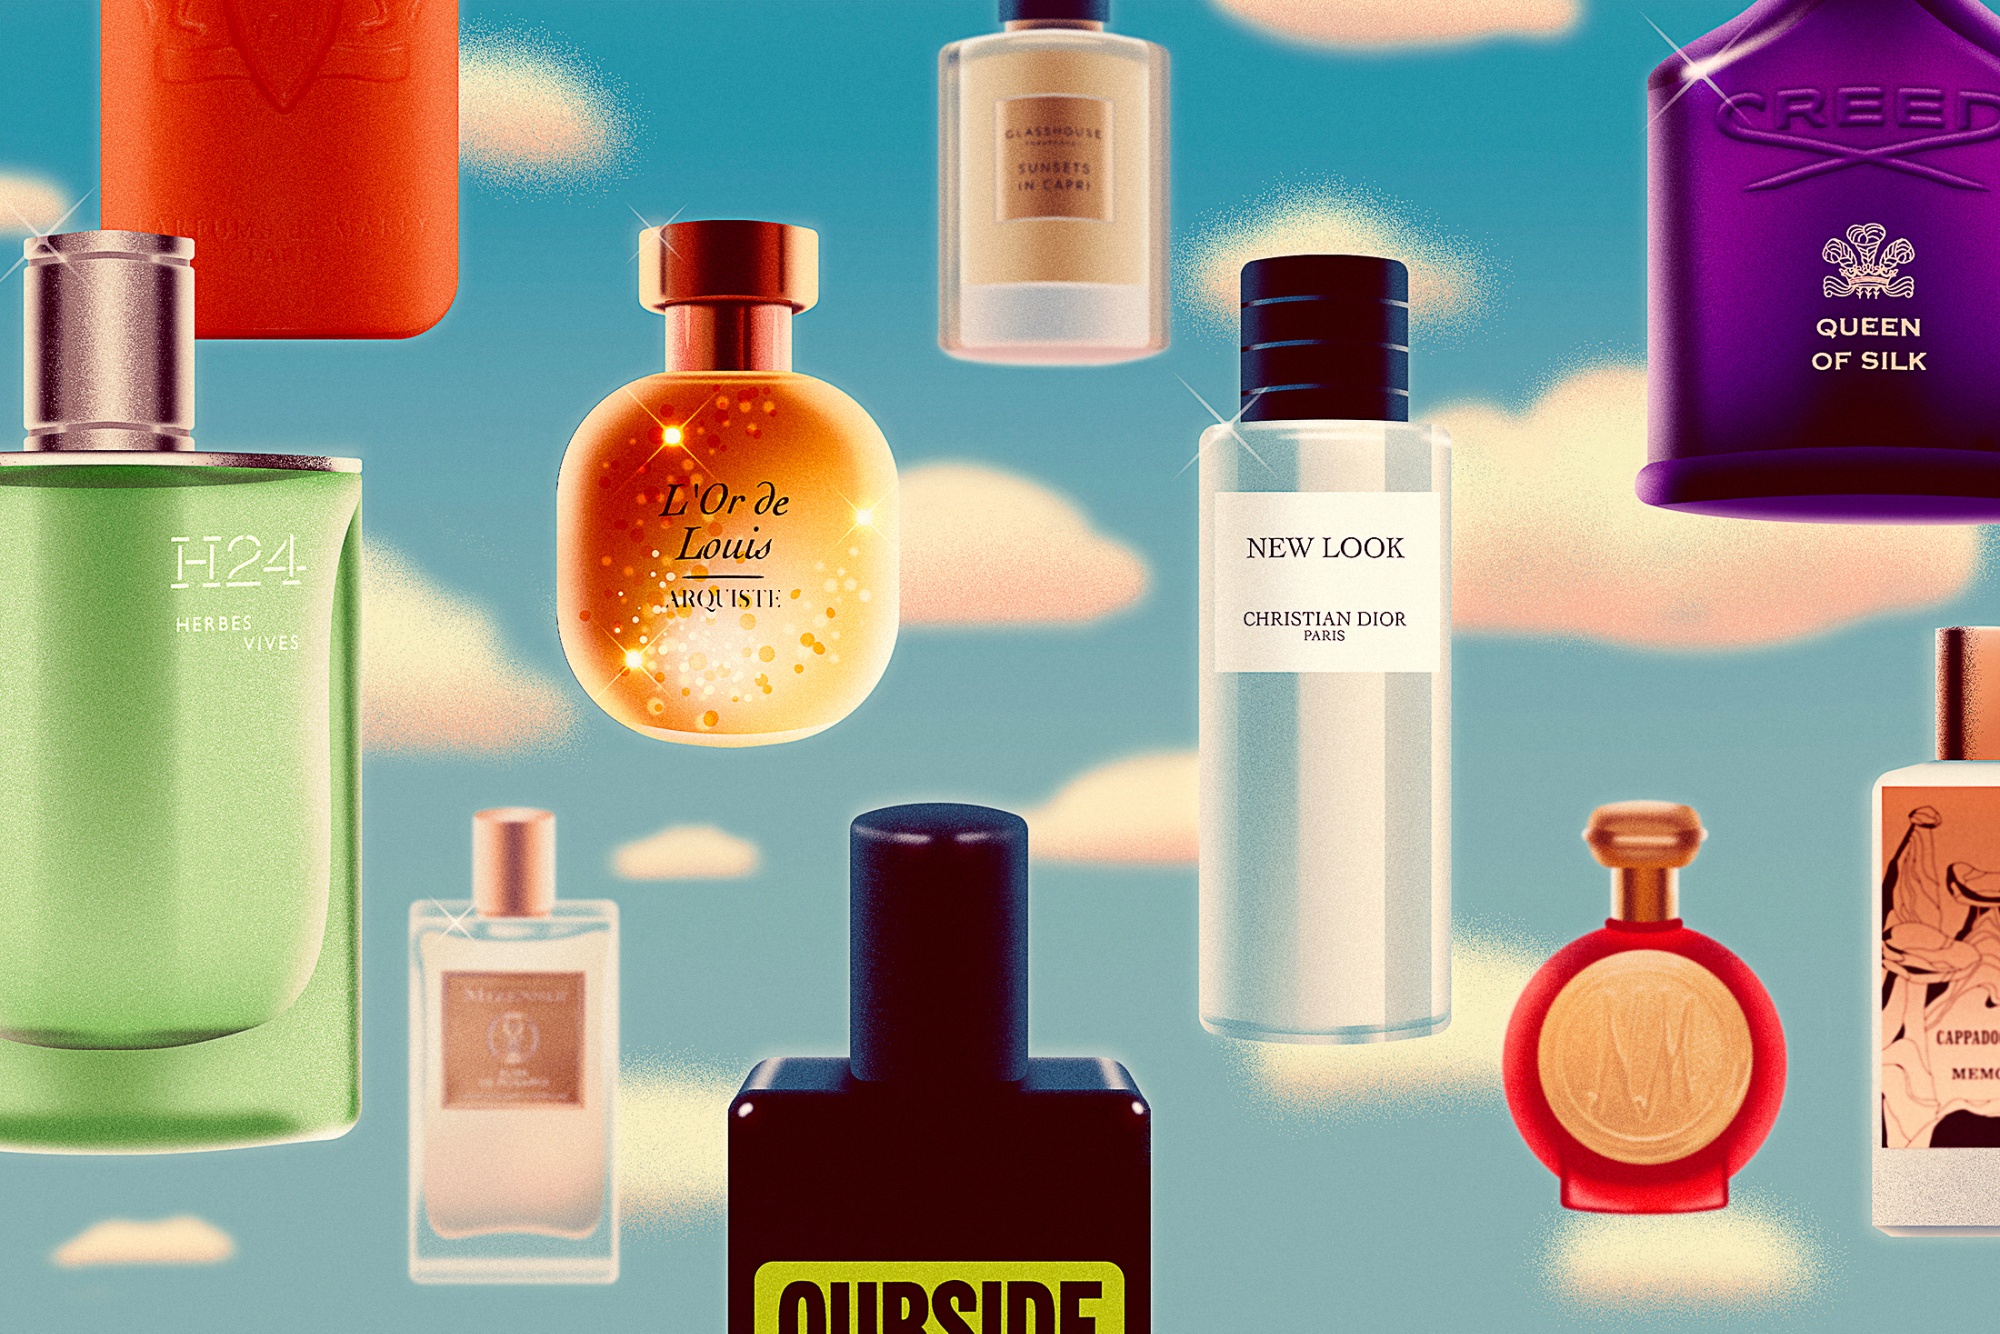 Sales of Fine Fragrance Are Up, Driven by Gen Z Quest to Smell